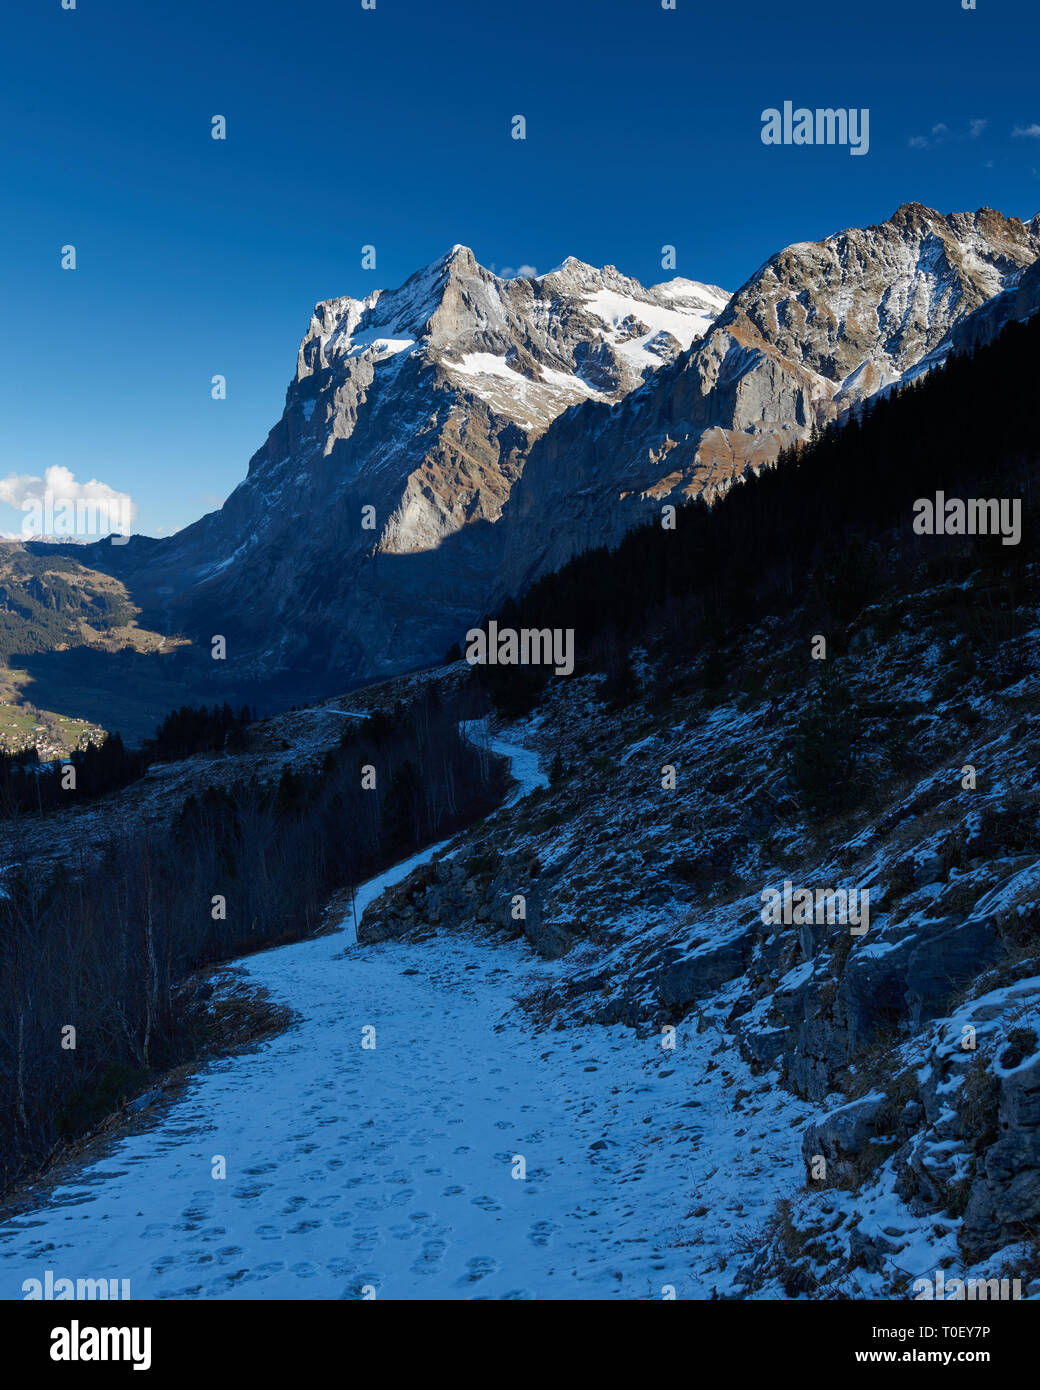 Unplugged in the Jungfrau region. A breathtaking long view along the snow covered Alpiglen trail as it traverses in Eiger's North Face shadow. Stock Photo